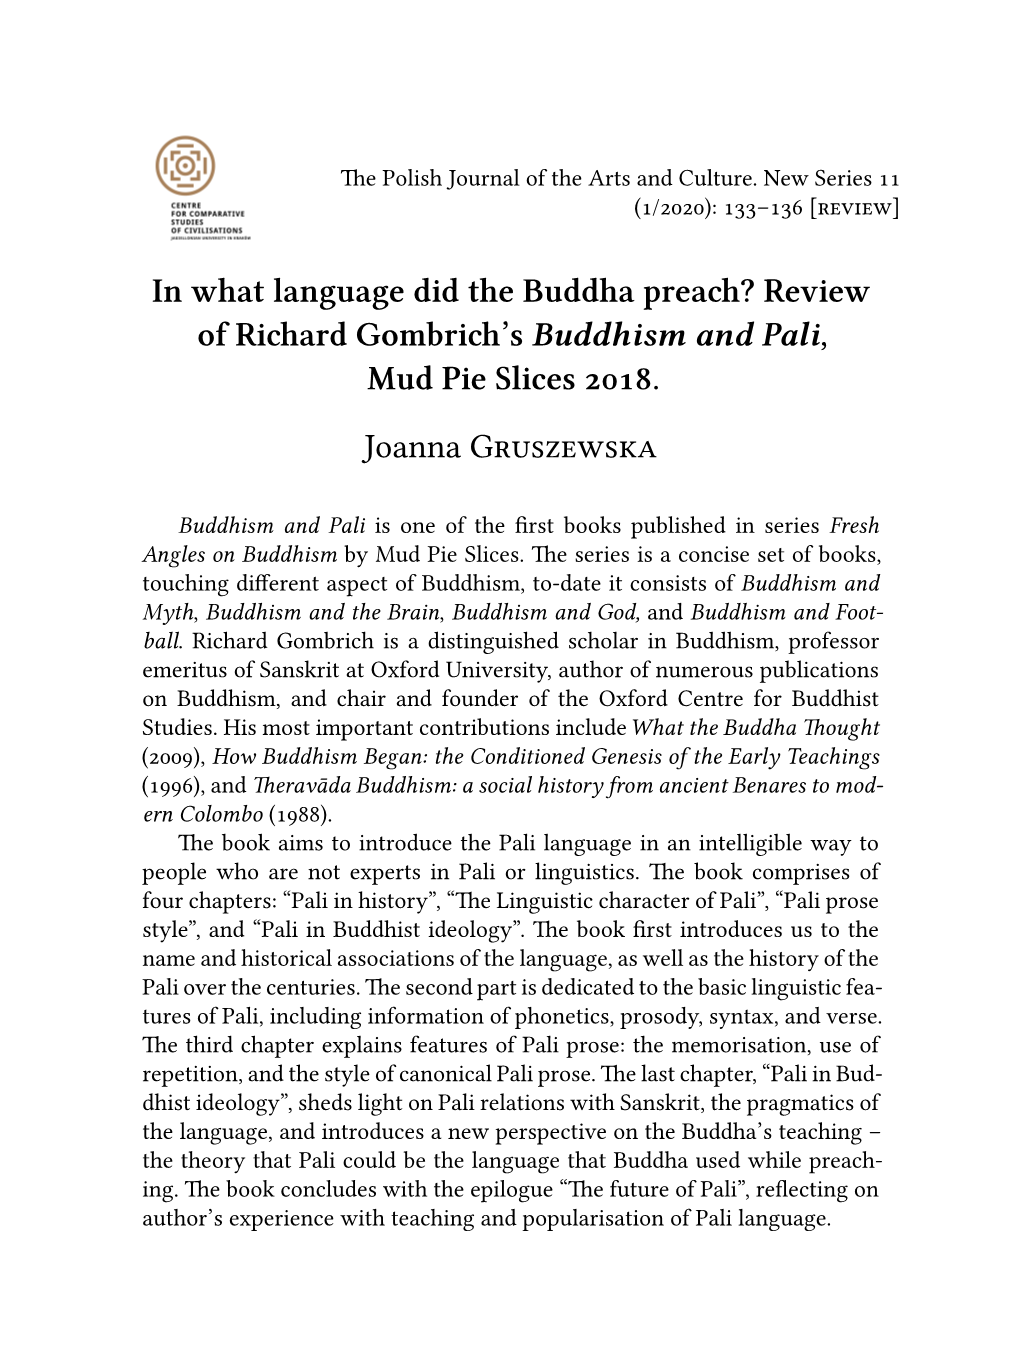 Review of Richard Gombrich's Buddhism and Pali,Mud Pie Slices